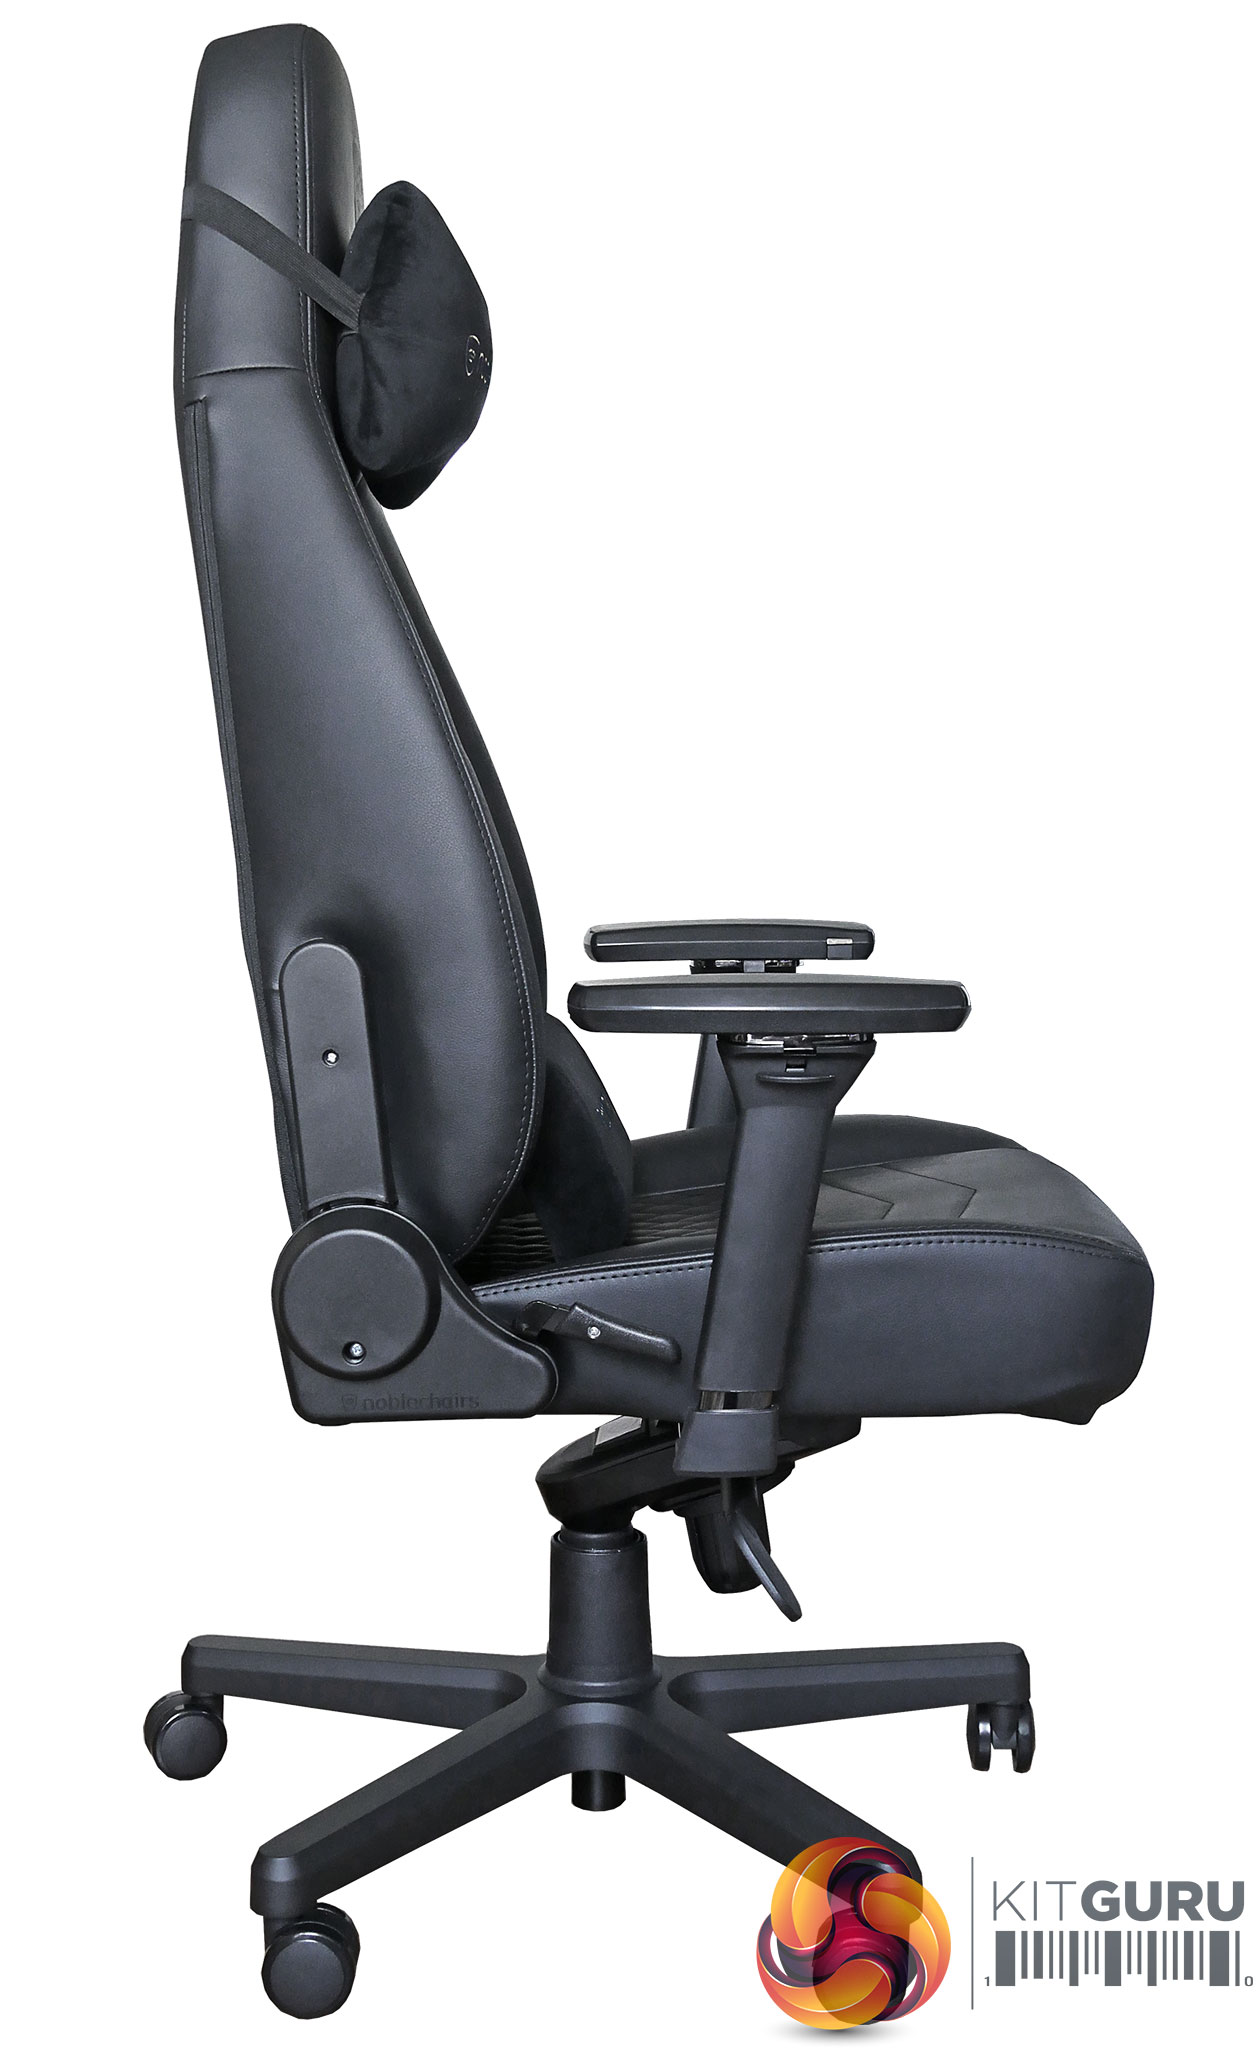 noblechairs icon leather gaming chair review  kitguru